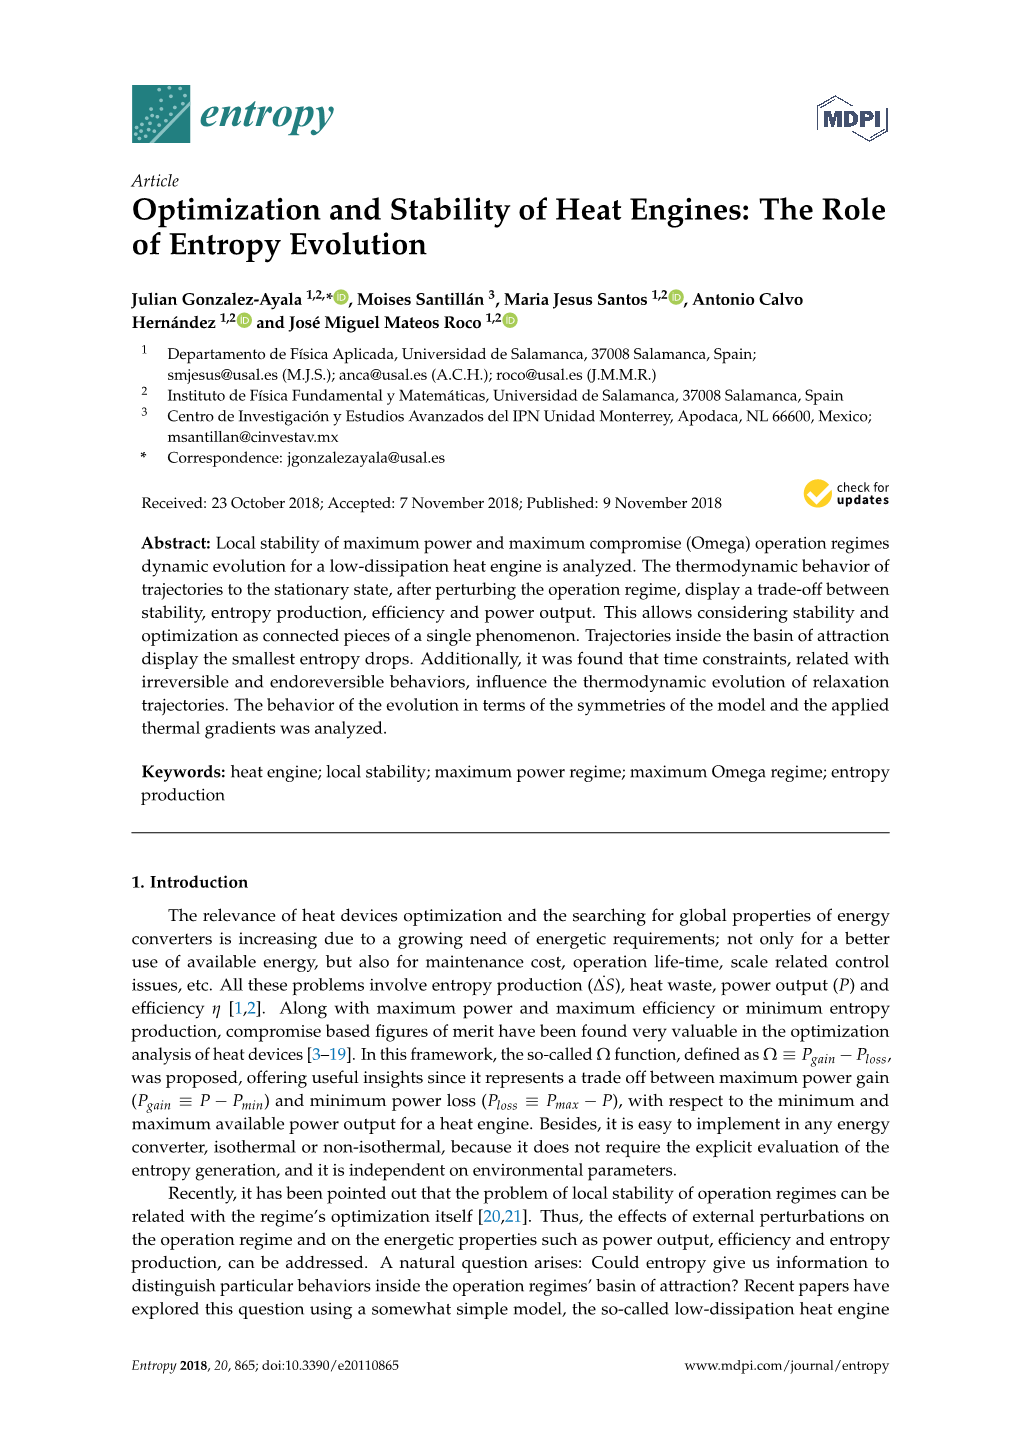 Optimization and Stability of Heat Engines: the Role of Entropy Evolution